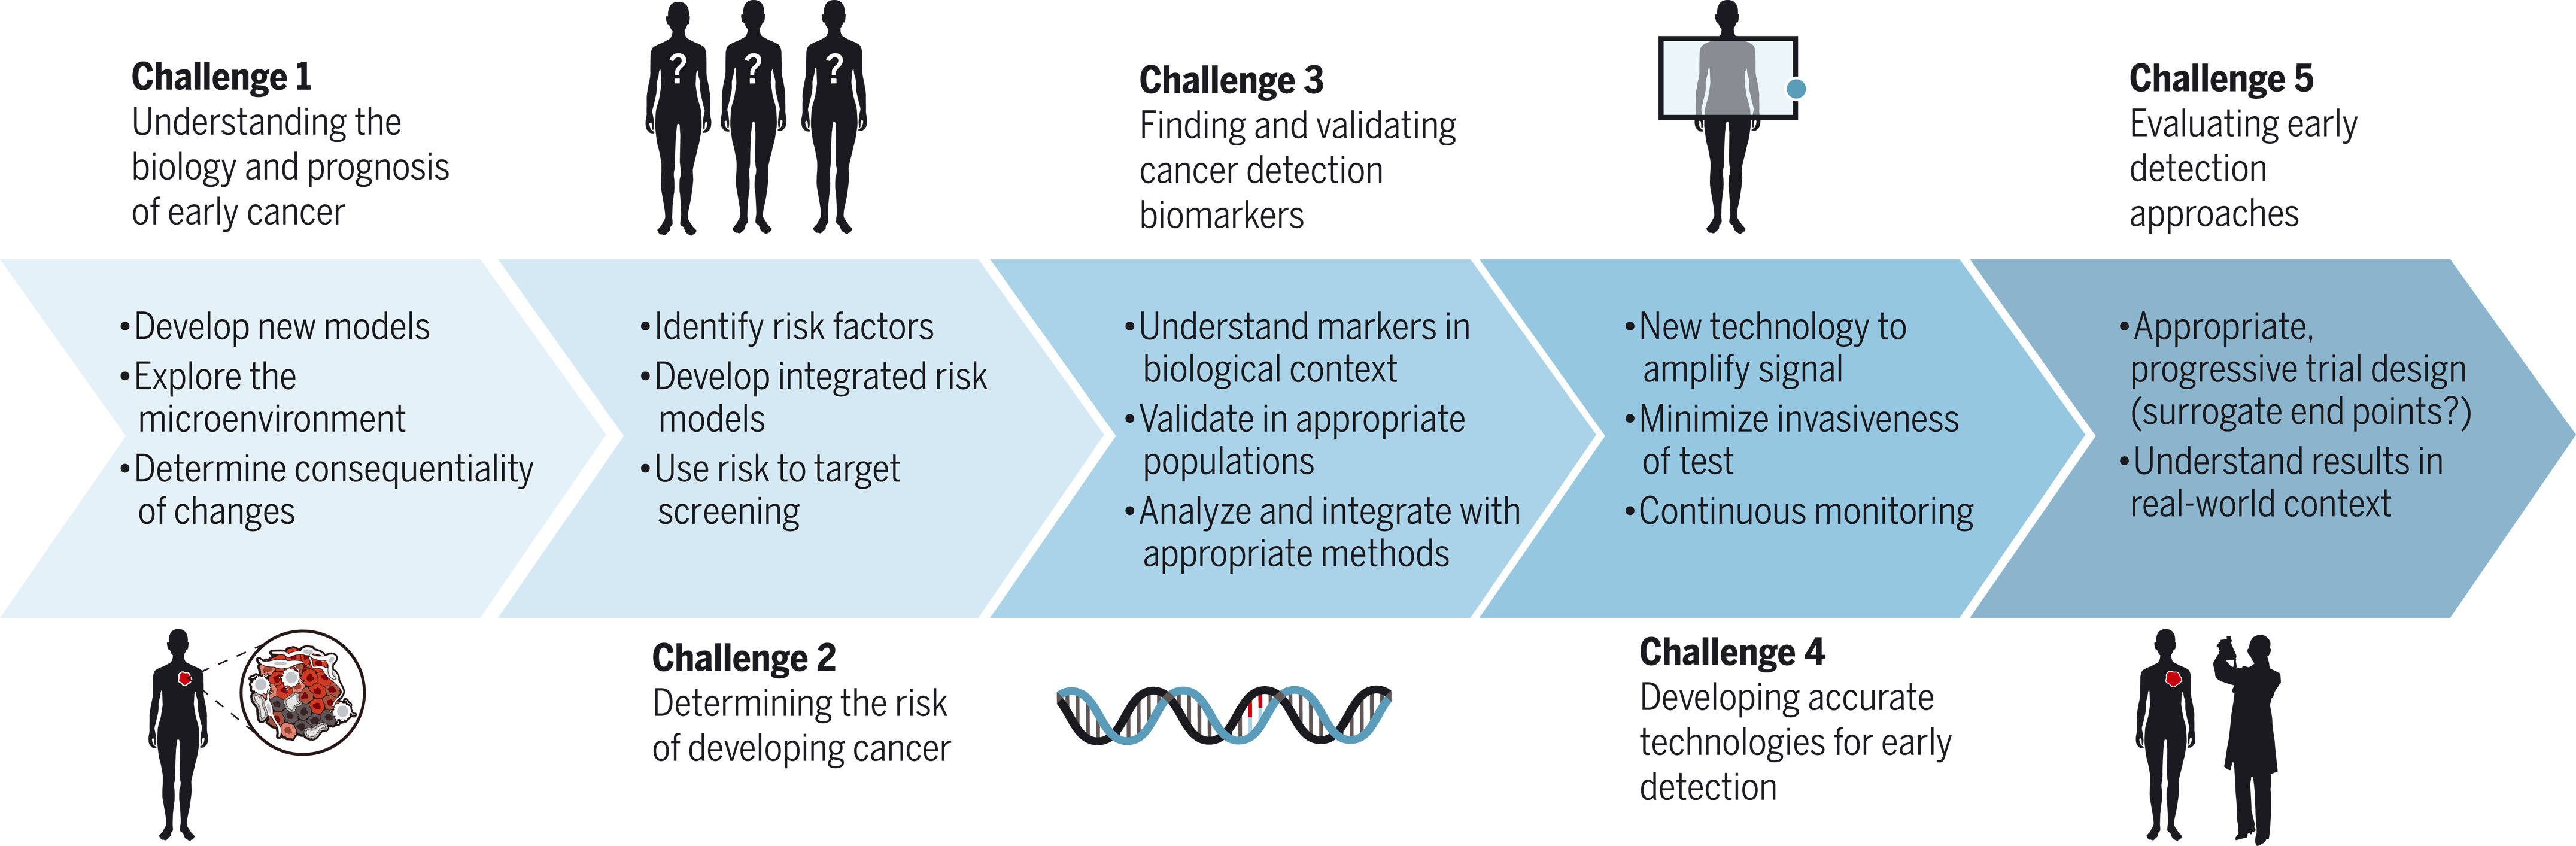 The future of early cancer detection